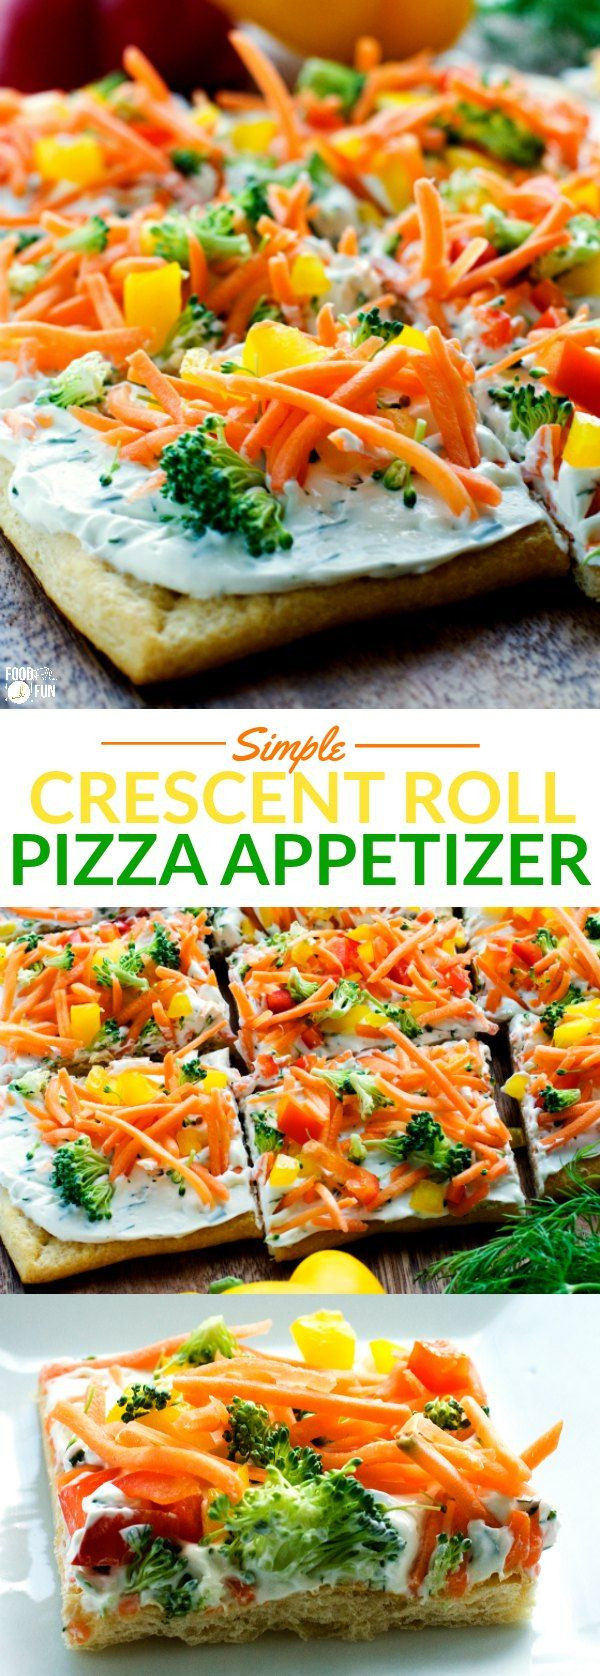 Appetizers Made With Crescent Rolls
 Simple Crescent Roll Pizza Appetizer